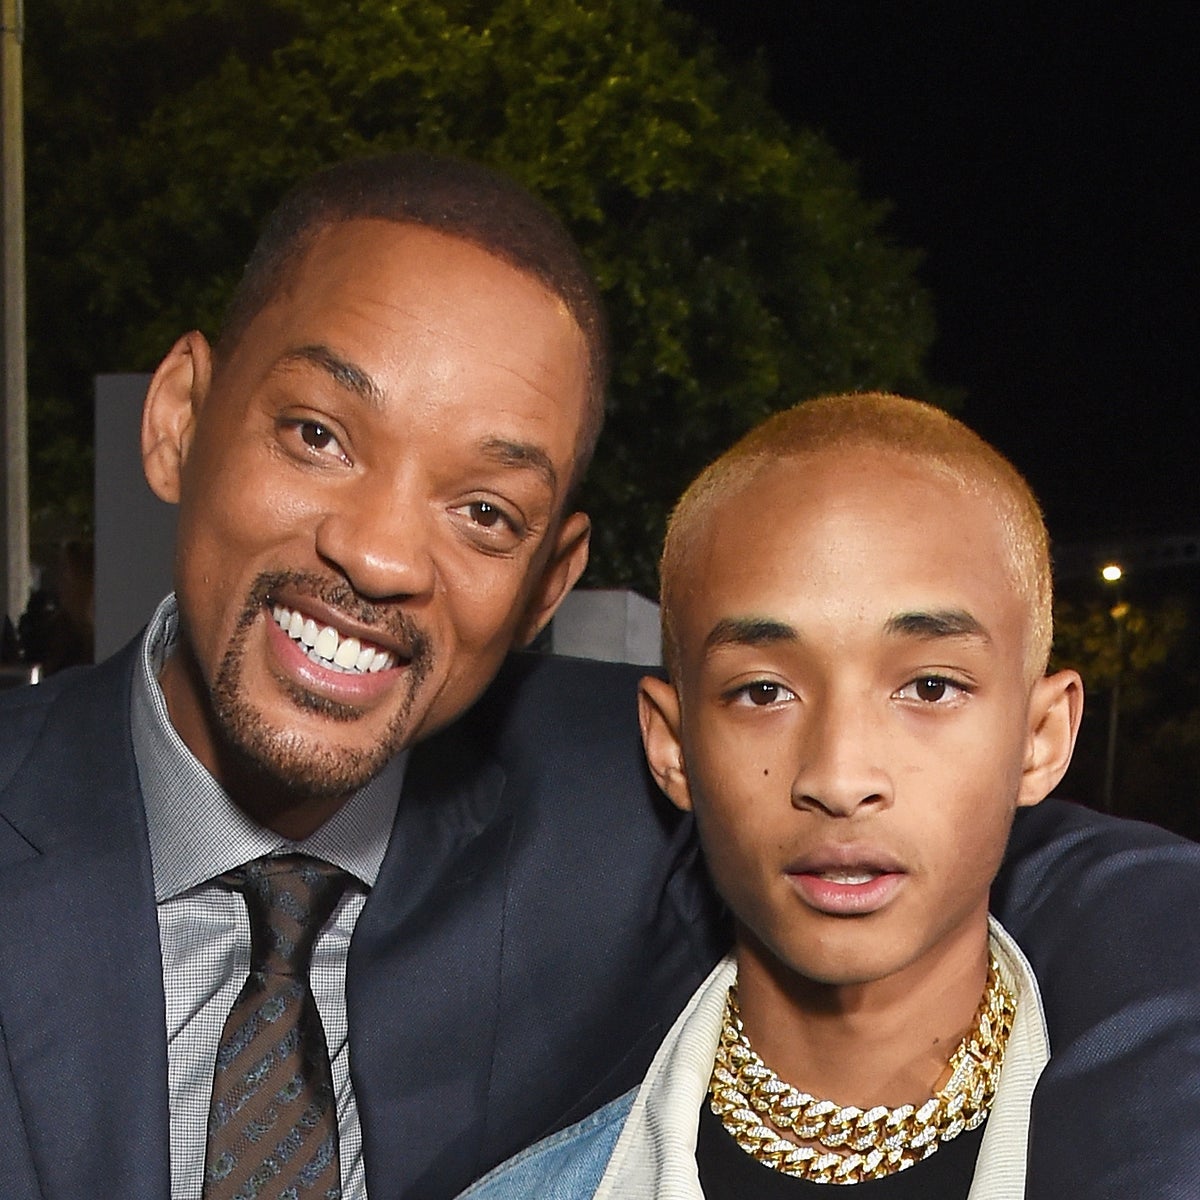 Jaden Smith: From Child Star To 24 Years Old